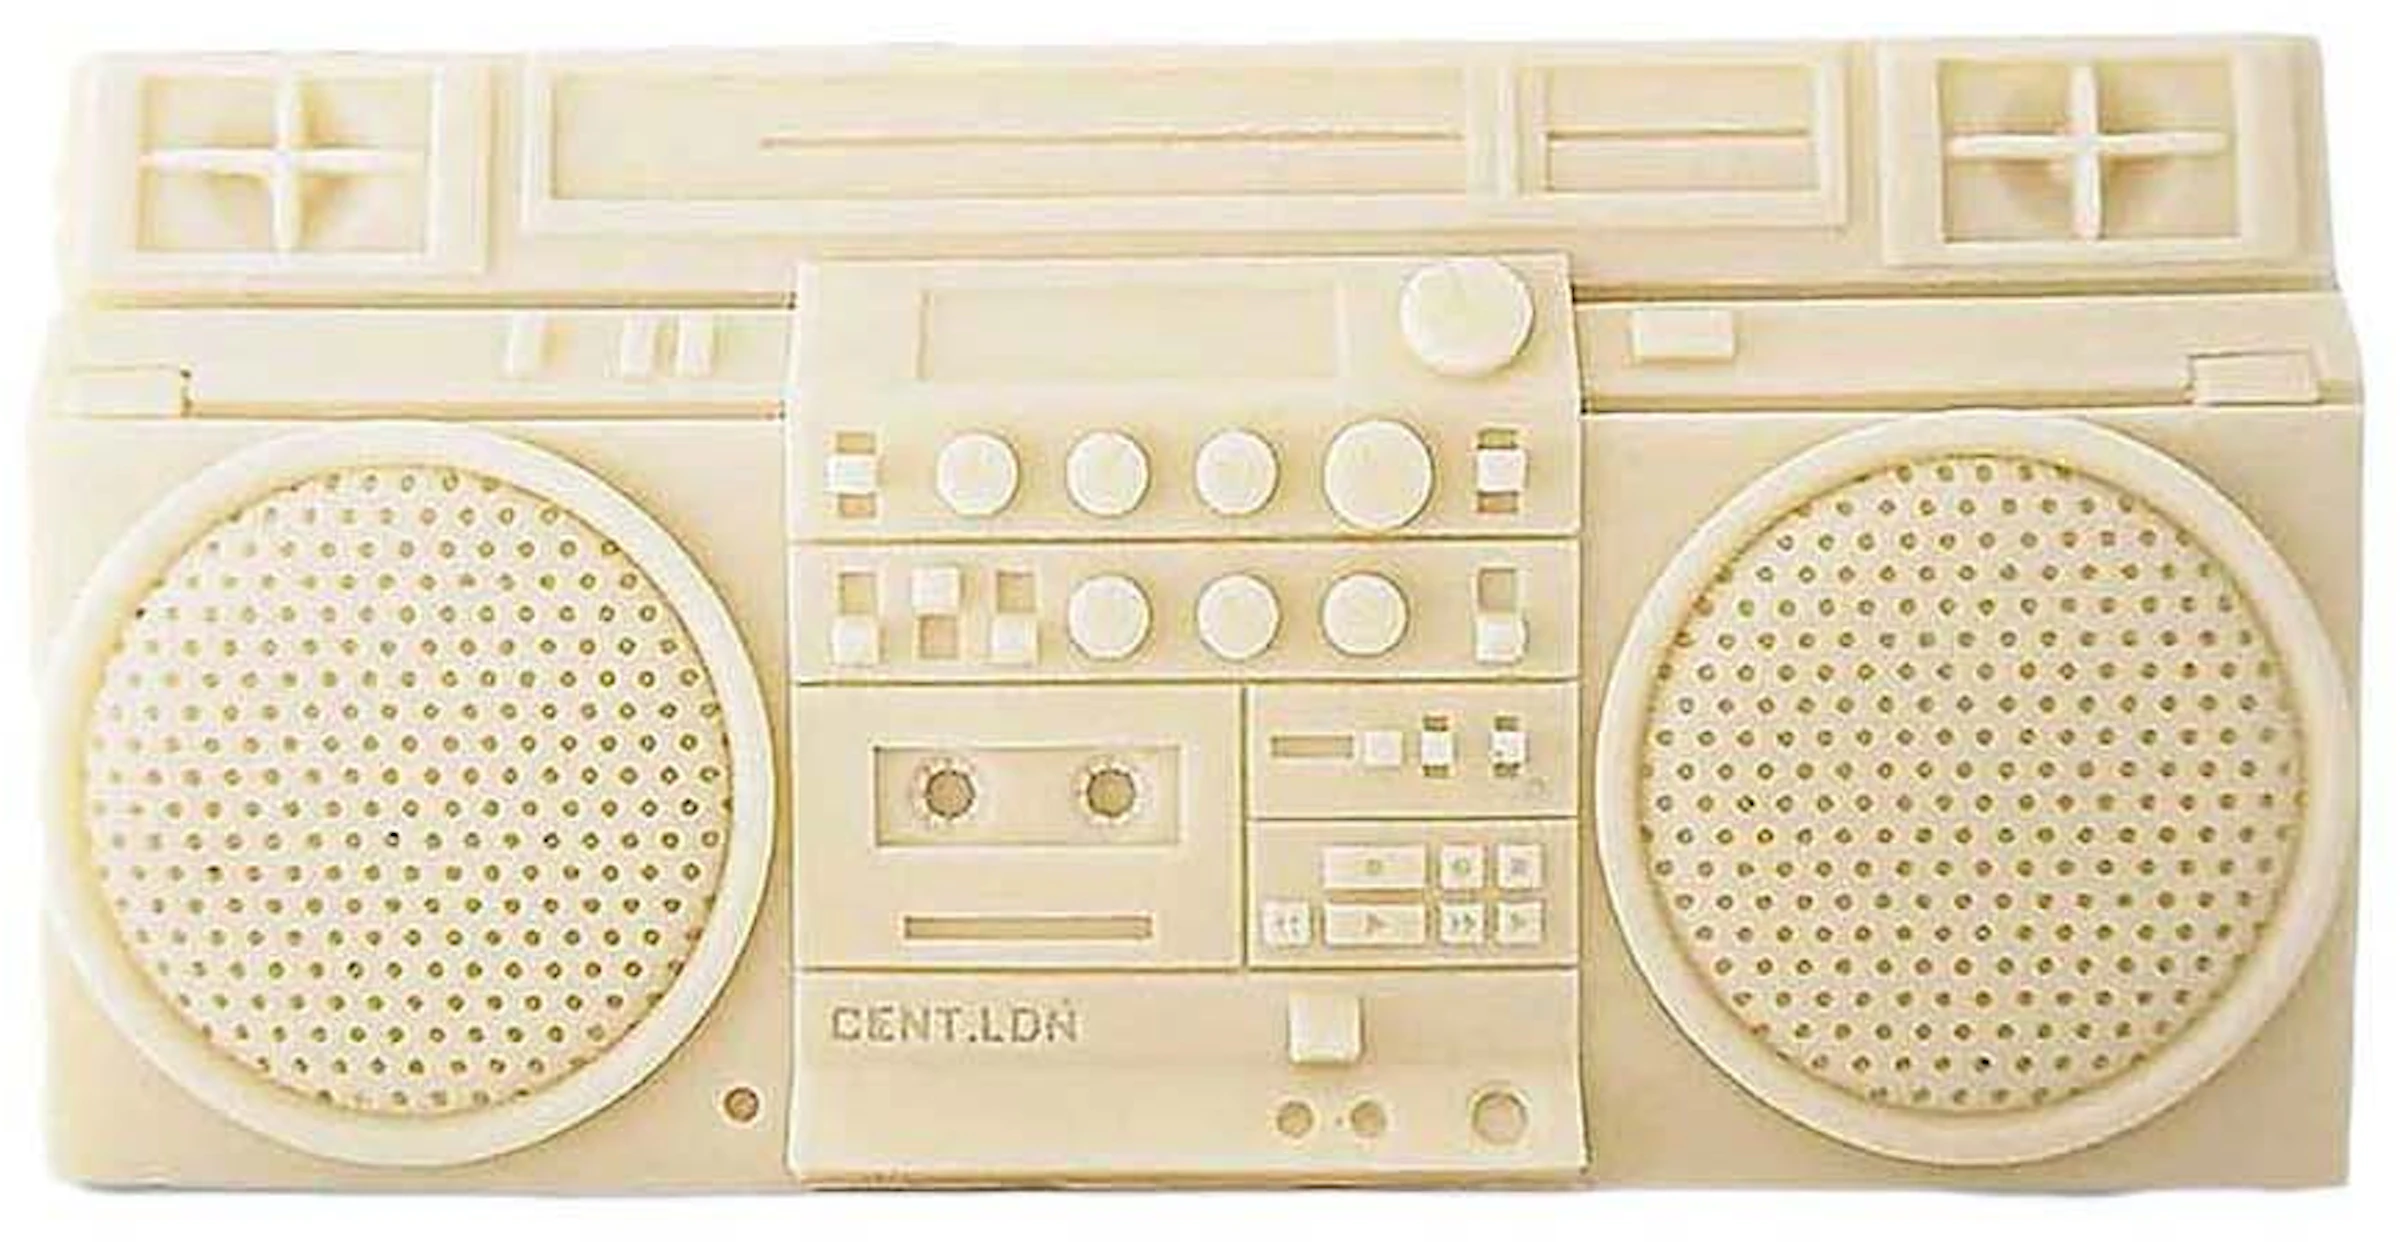 Boombox 1900g Candle - US